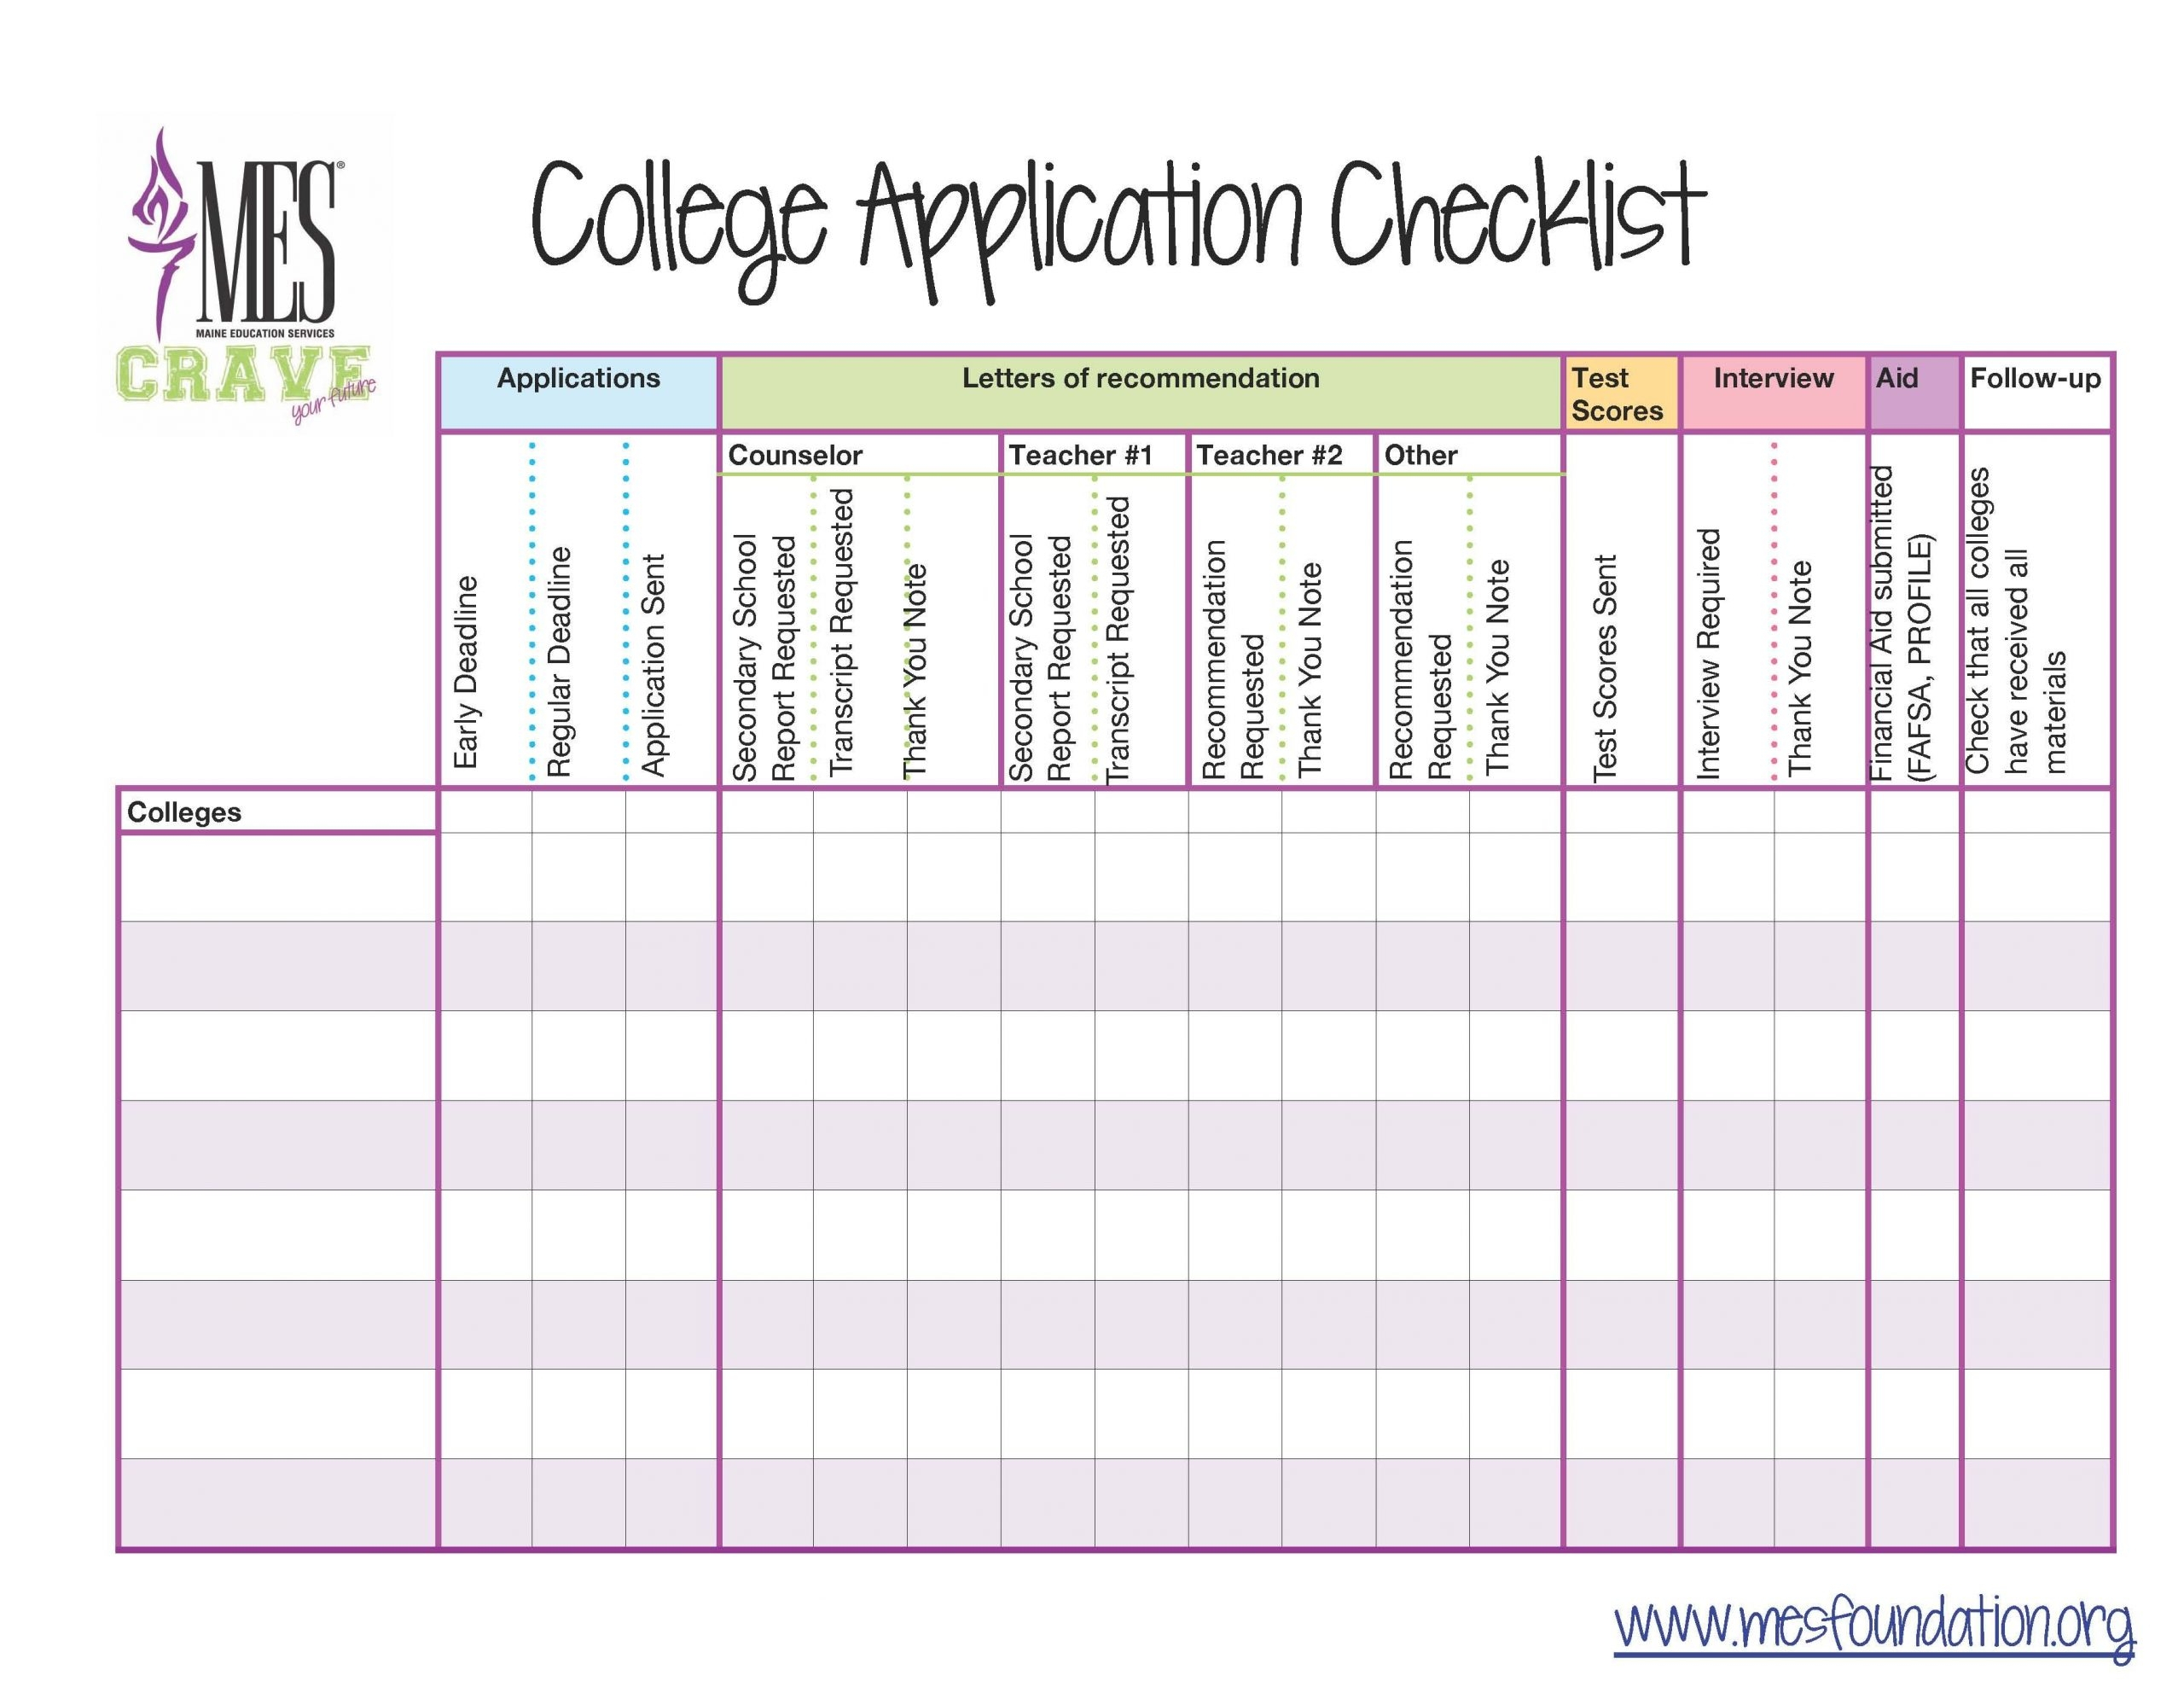 template : College Spreadsheet Application Checklist Wrs11 Org  Inside College Application Checklist Template Throughout College Application Checklist Template